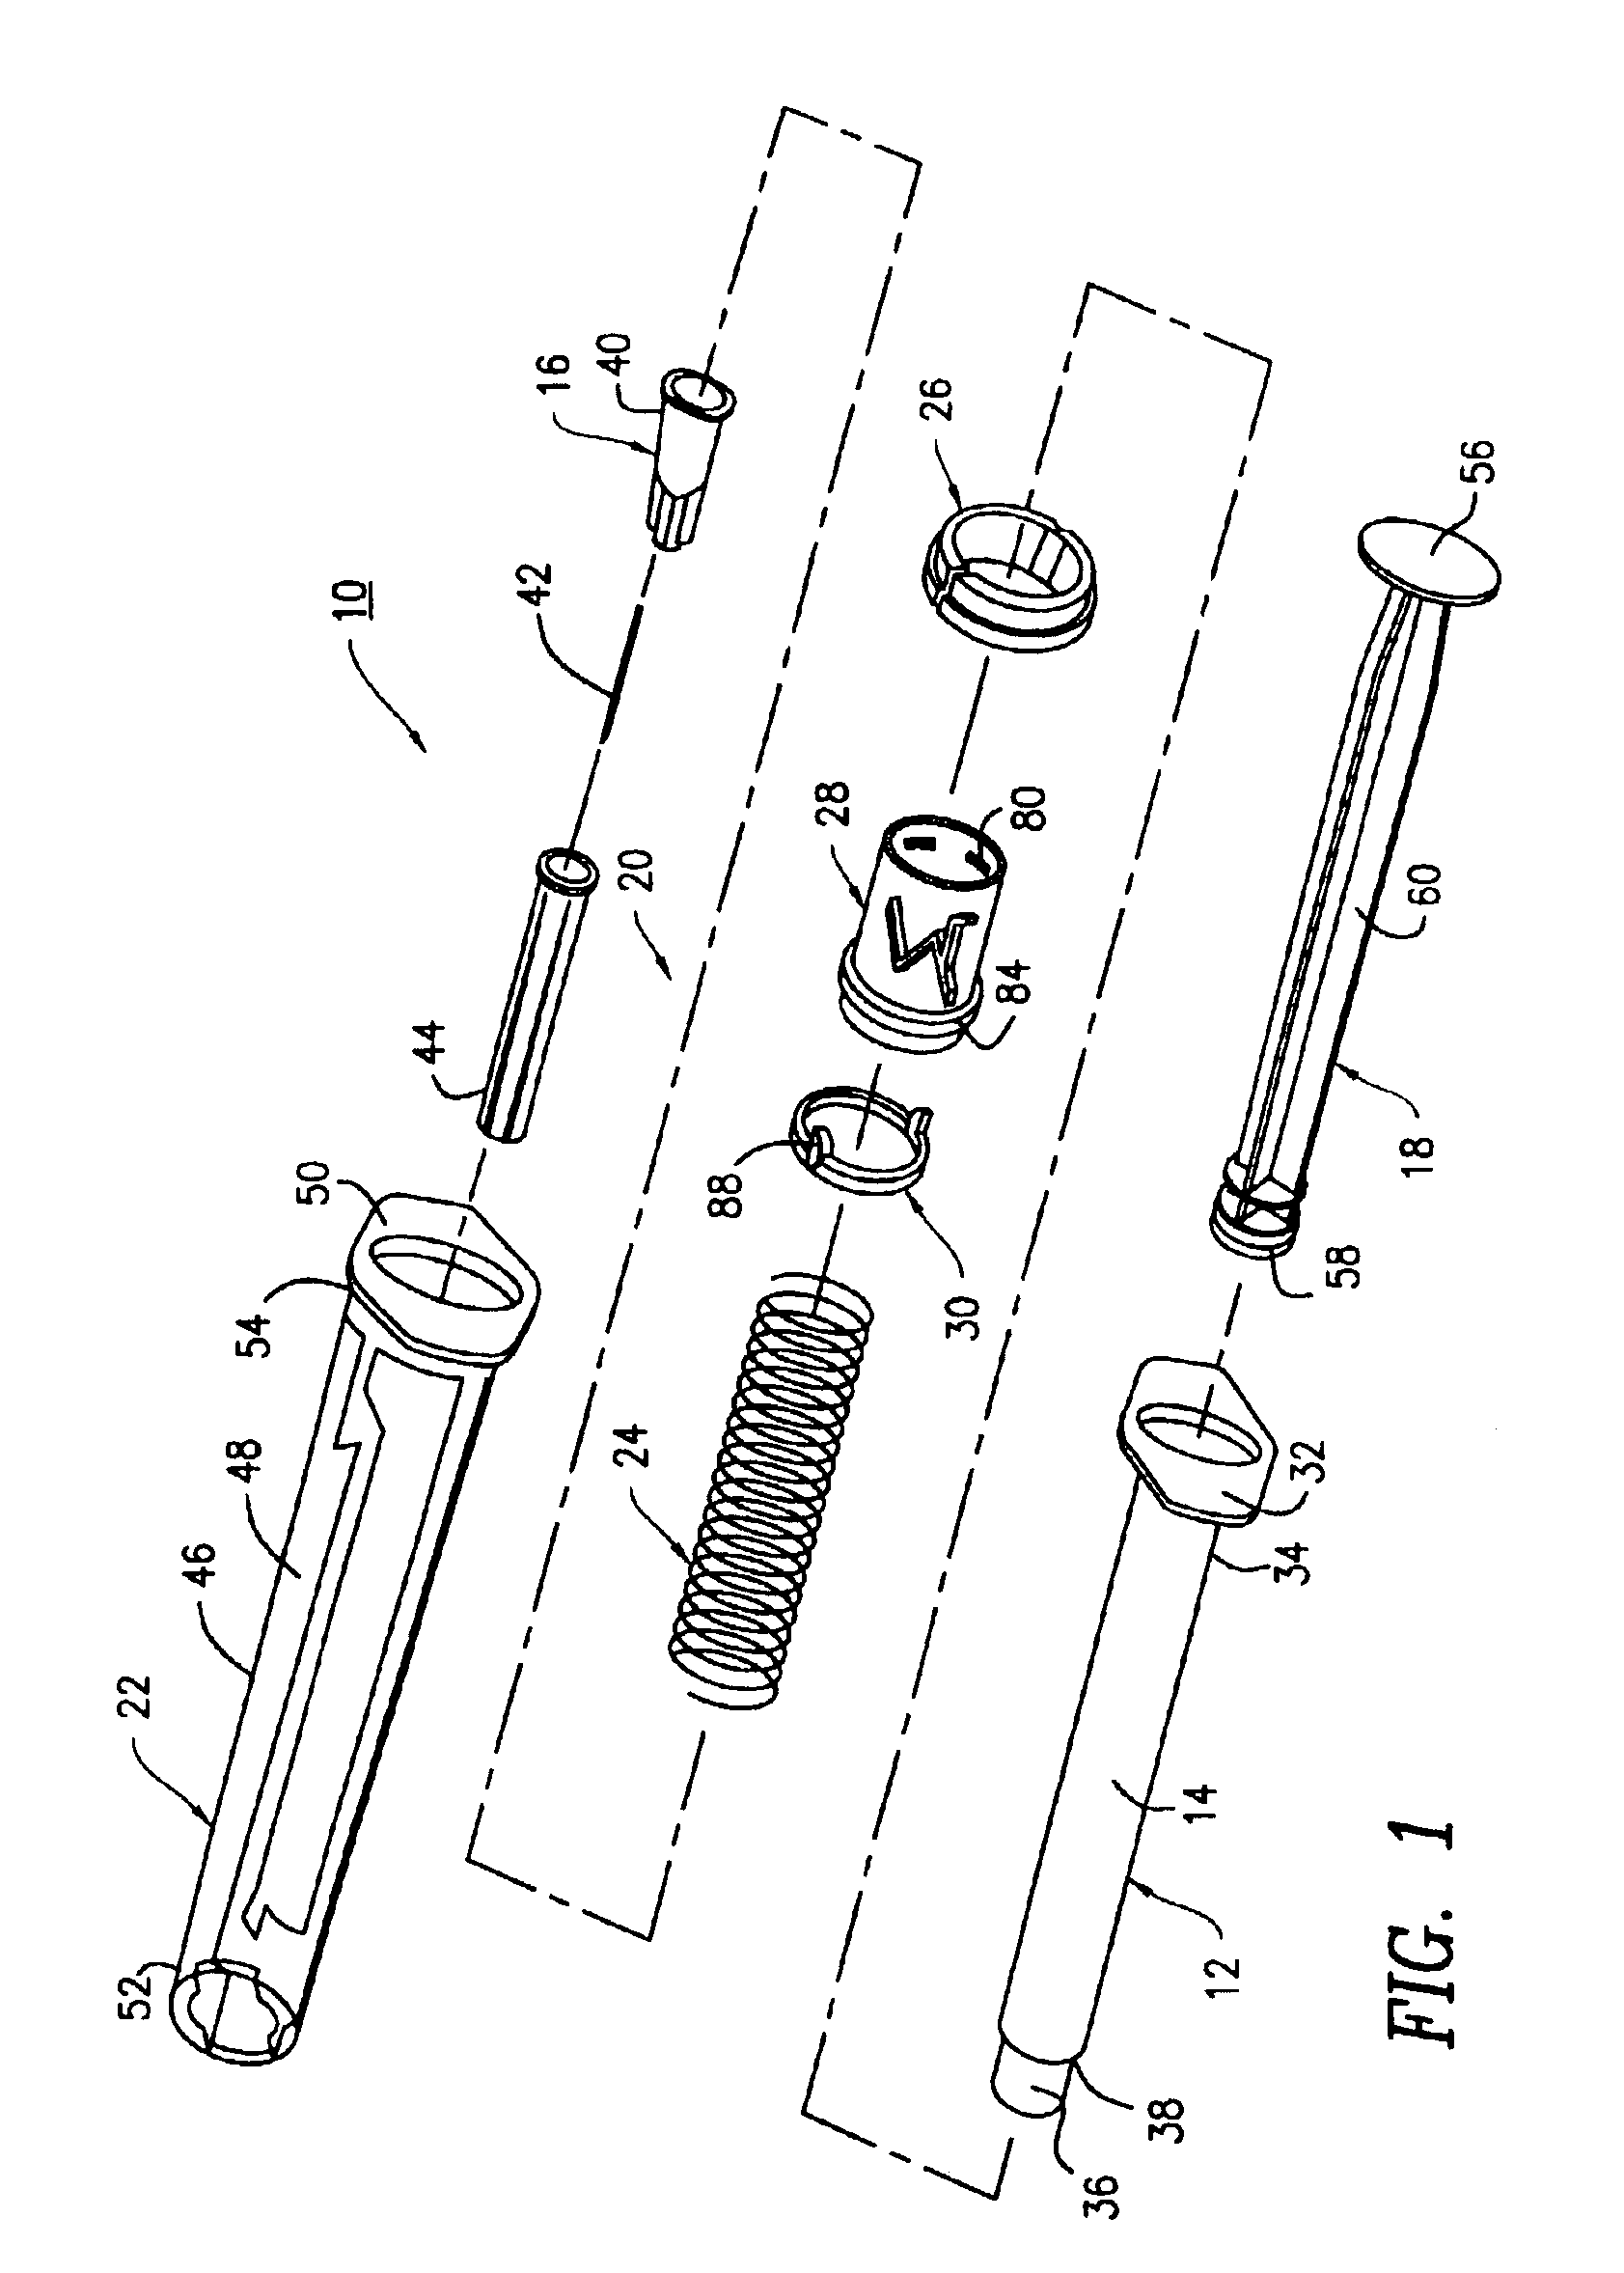 Adaptor for converting a non-safety syringe into a safety syringe